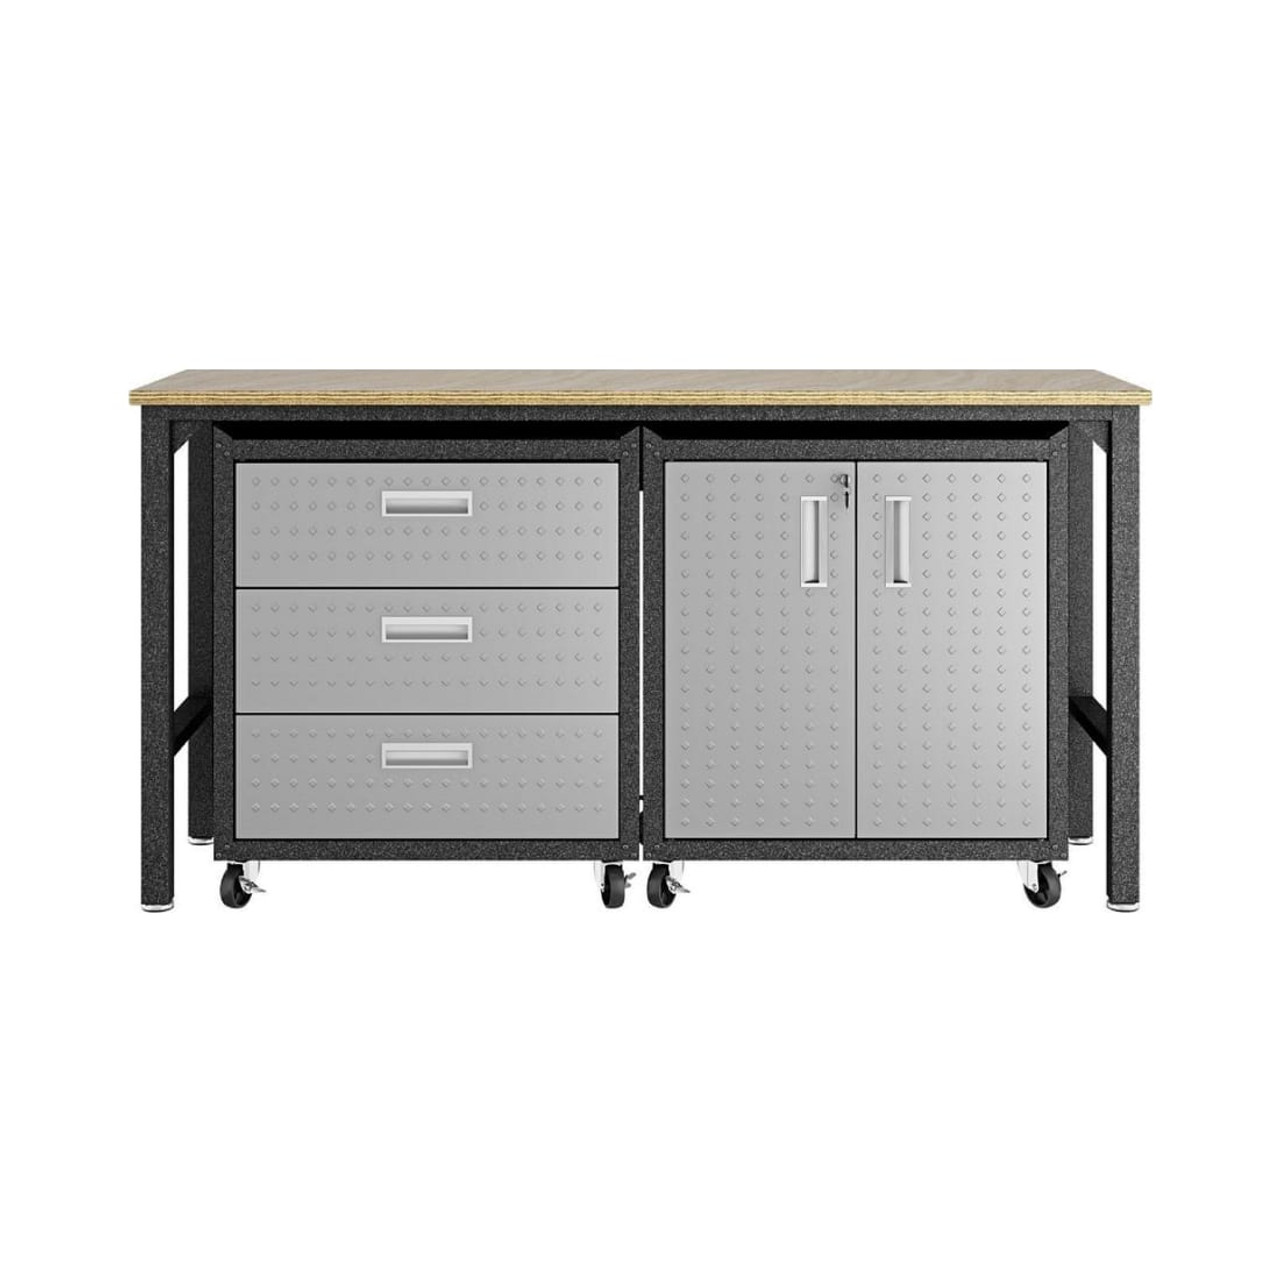 Fortress 3-Piece Mobile Space-Saving Garage Cabinet and Worktable 3.0 in Gray